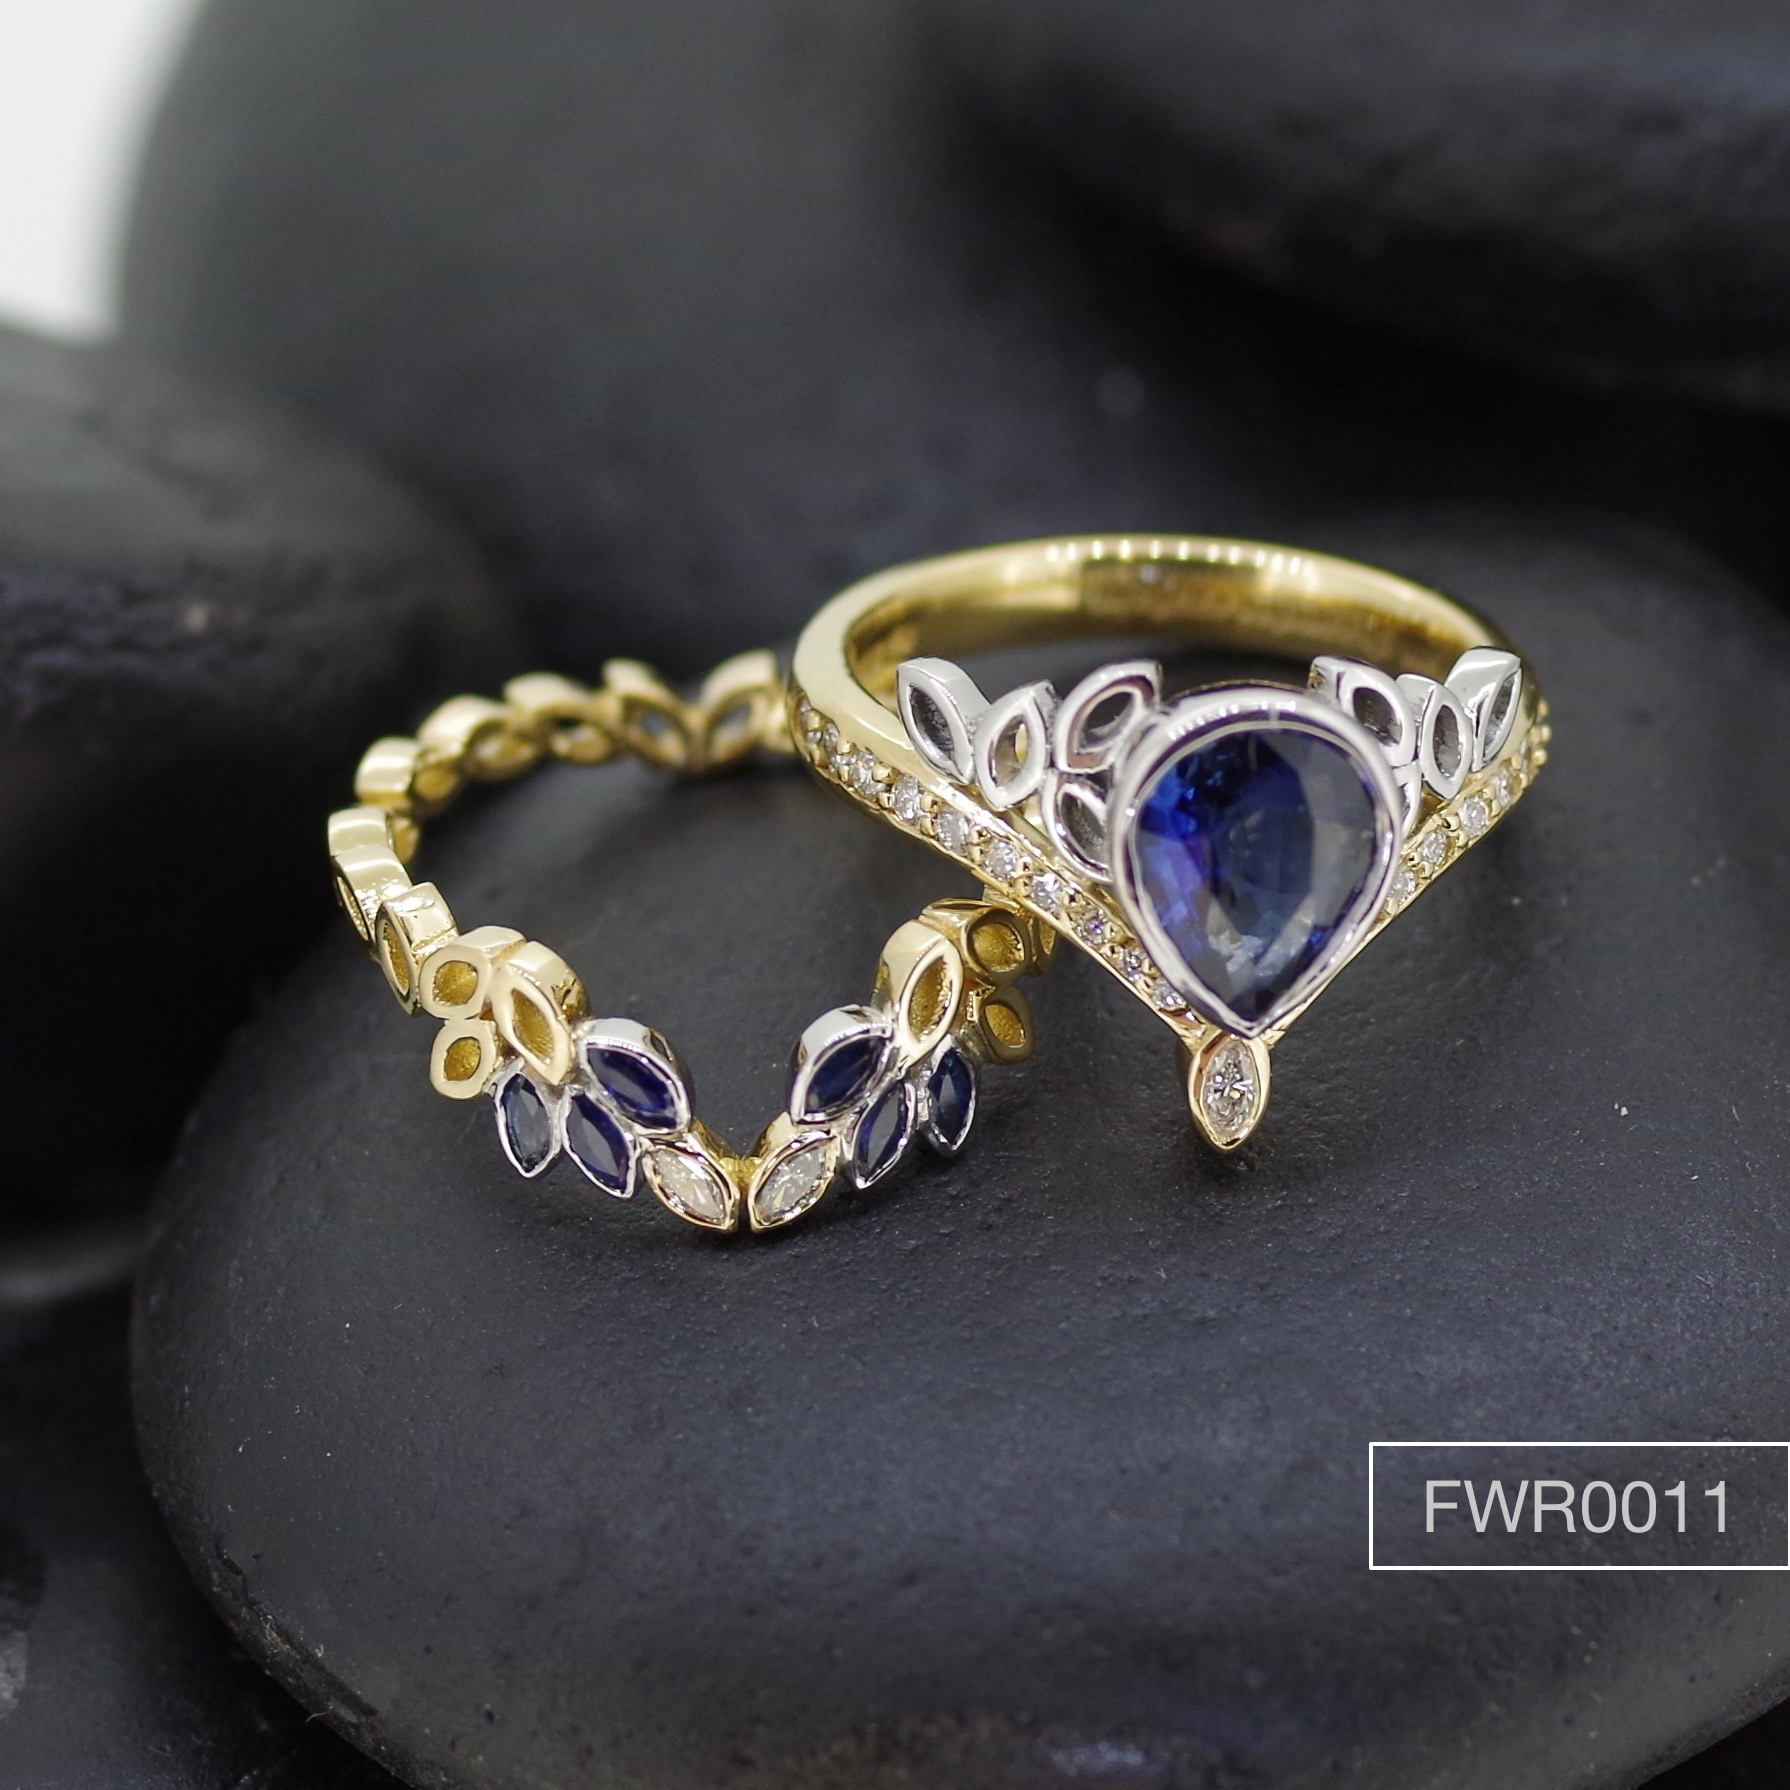 Sapphire & Diamond set fitted ring set in 22ct Gold & Platinum.